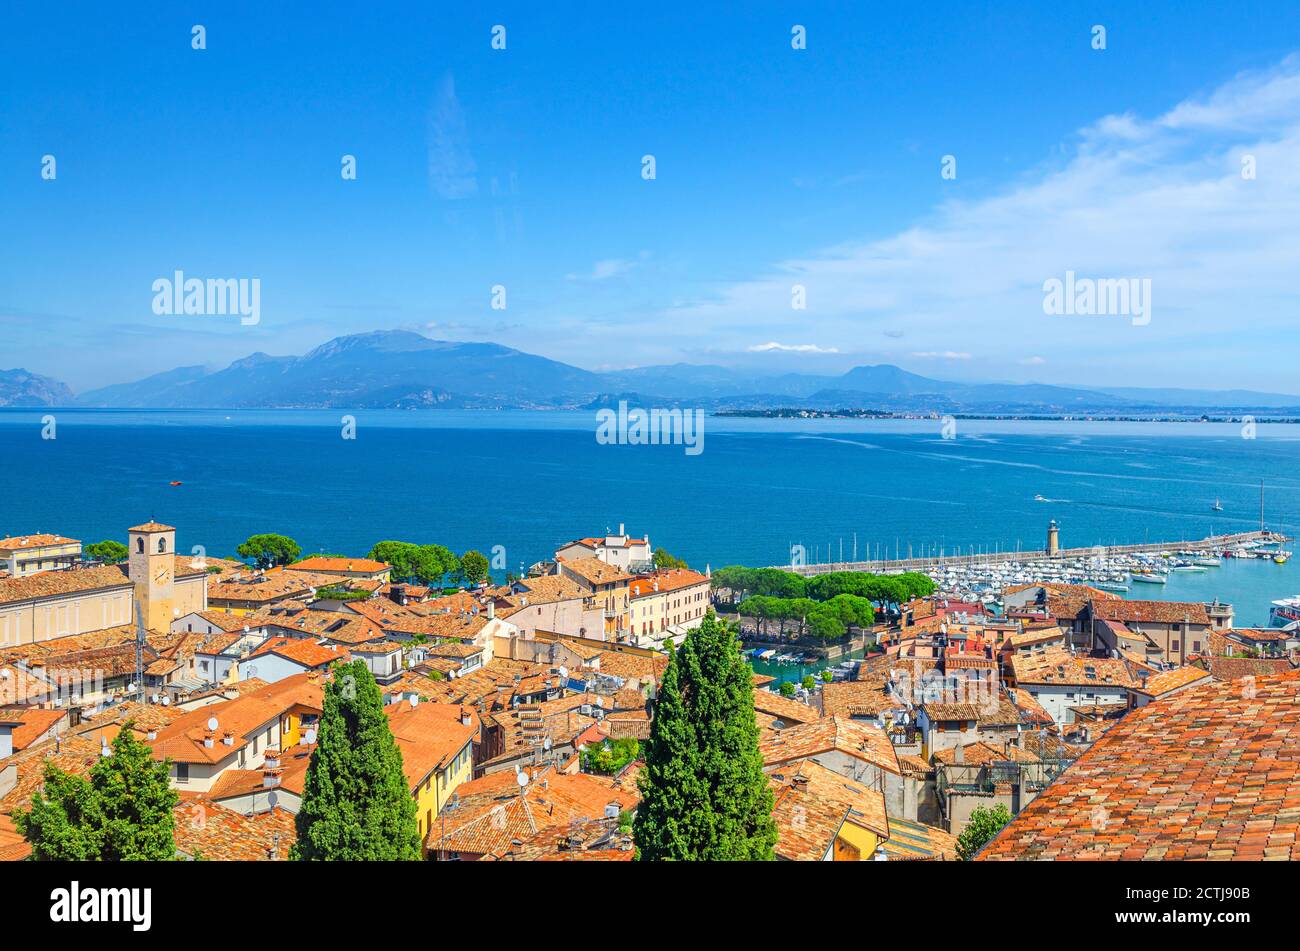 Aerial panoramic view of Desenzano del Garda town, red tiled roof buildings, Garda Lake water surface, Monte Baldo mountain range, Sirmione peninsula, molo pier lighthouse, Lombardy, Northern Italy Stock Photo